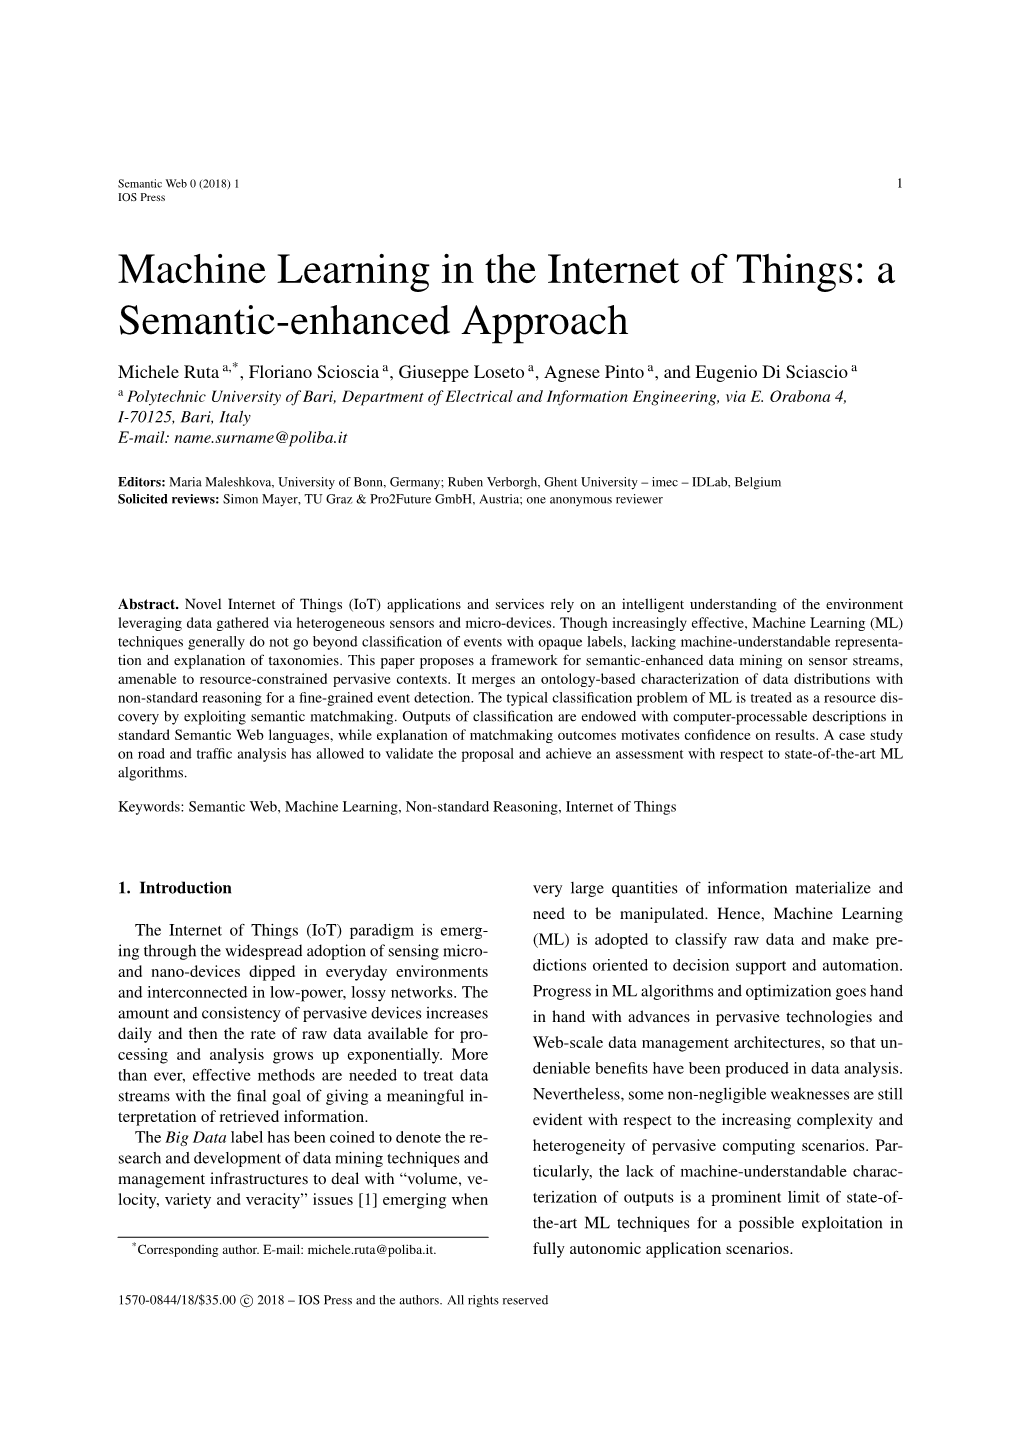 Machine Learning in the Internet of Things: a Semantic-Enhanced Approach